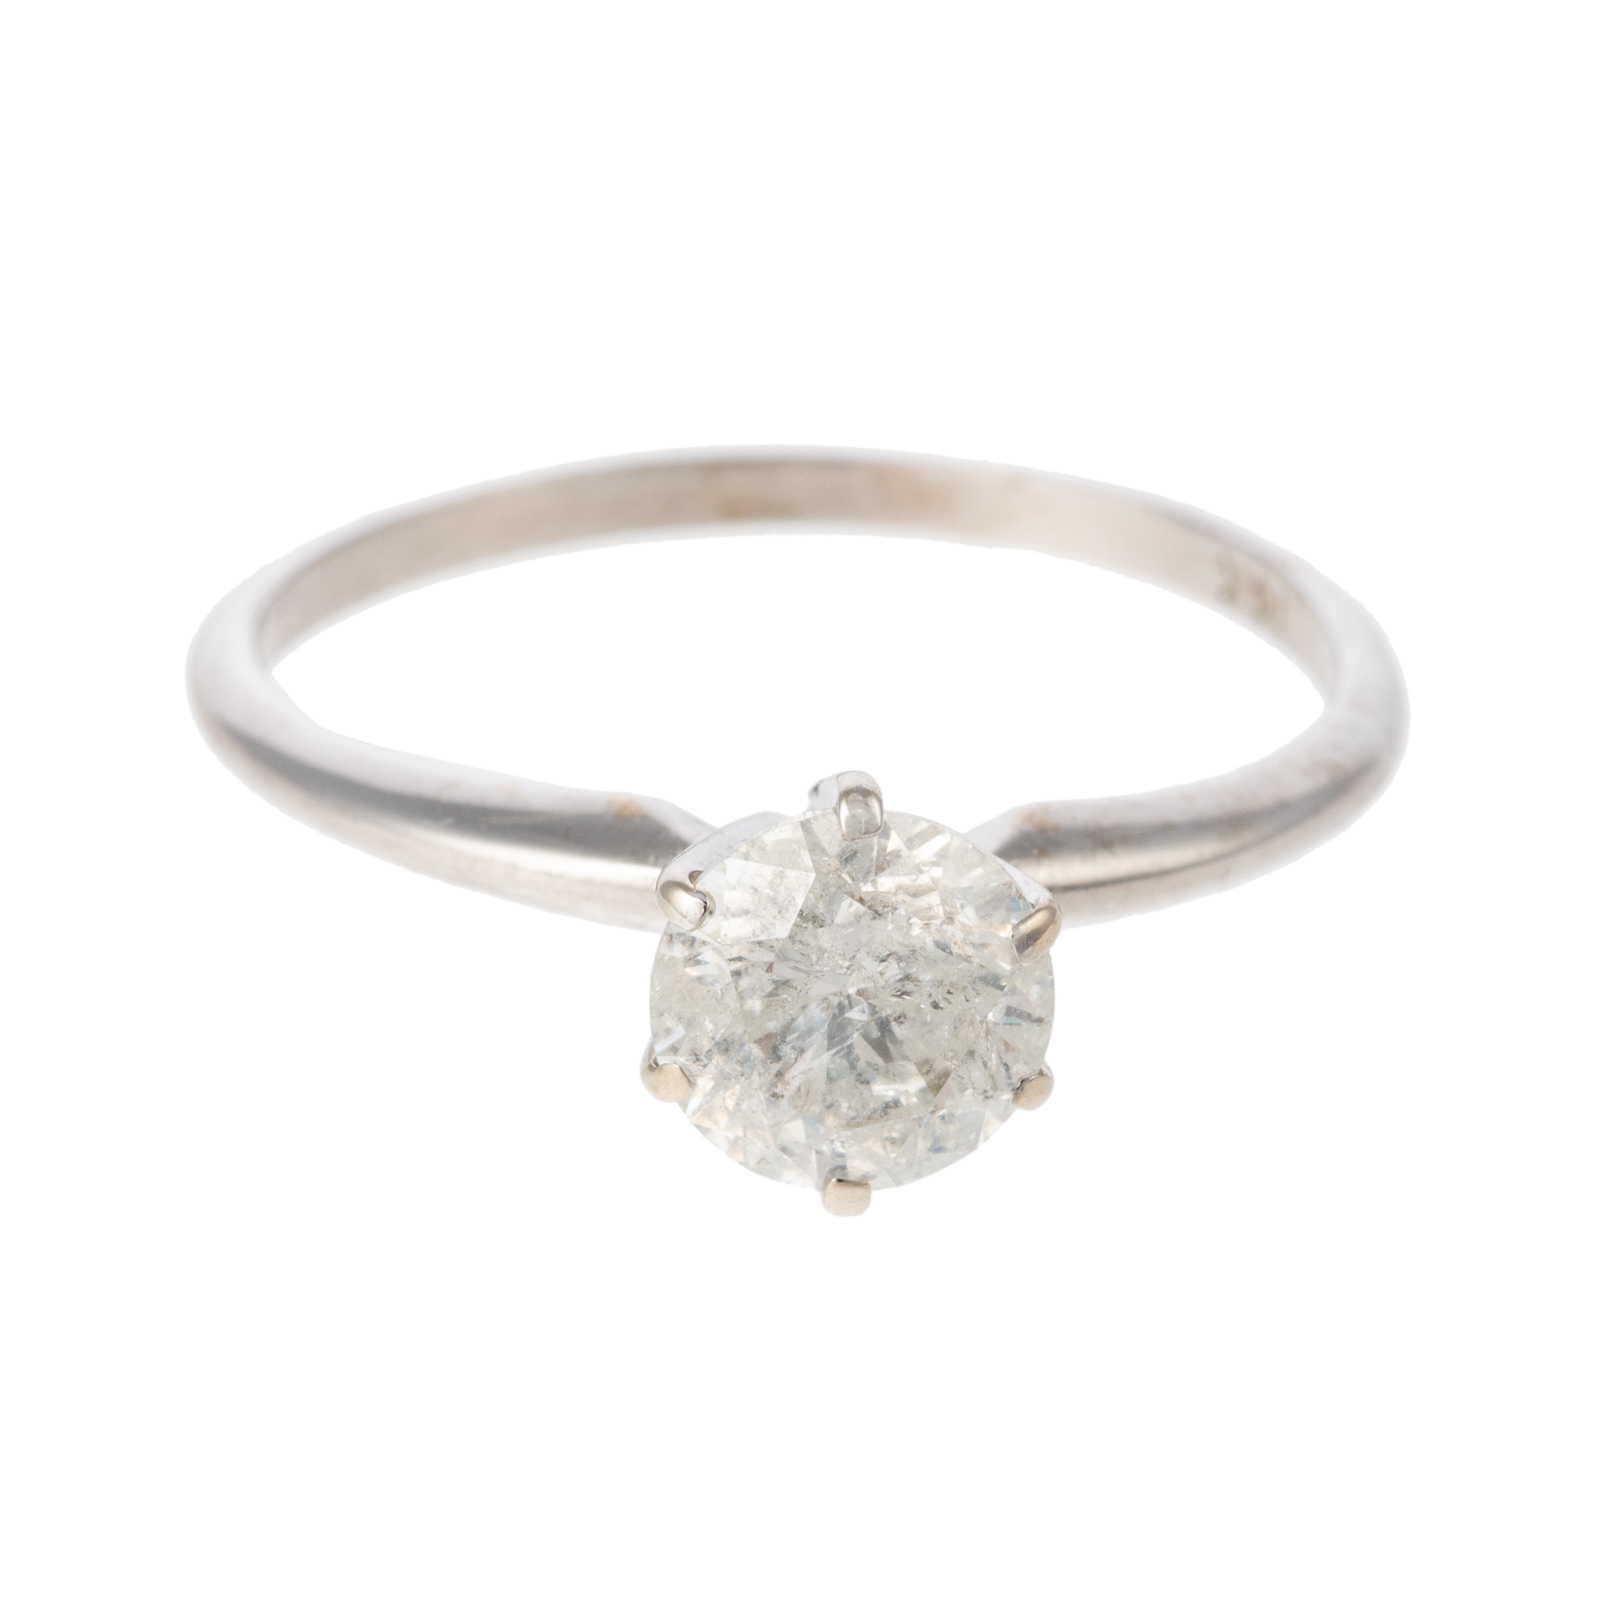 A 1 05 CT ROUND DIAMOND RING IN 33869d